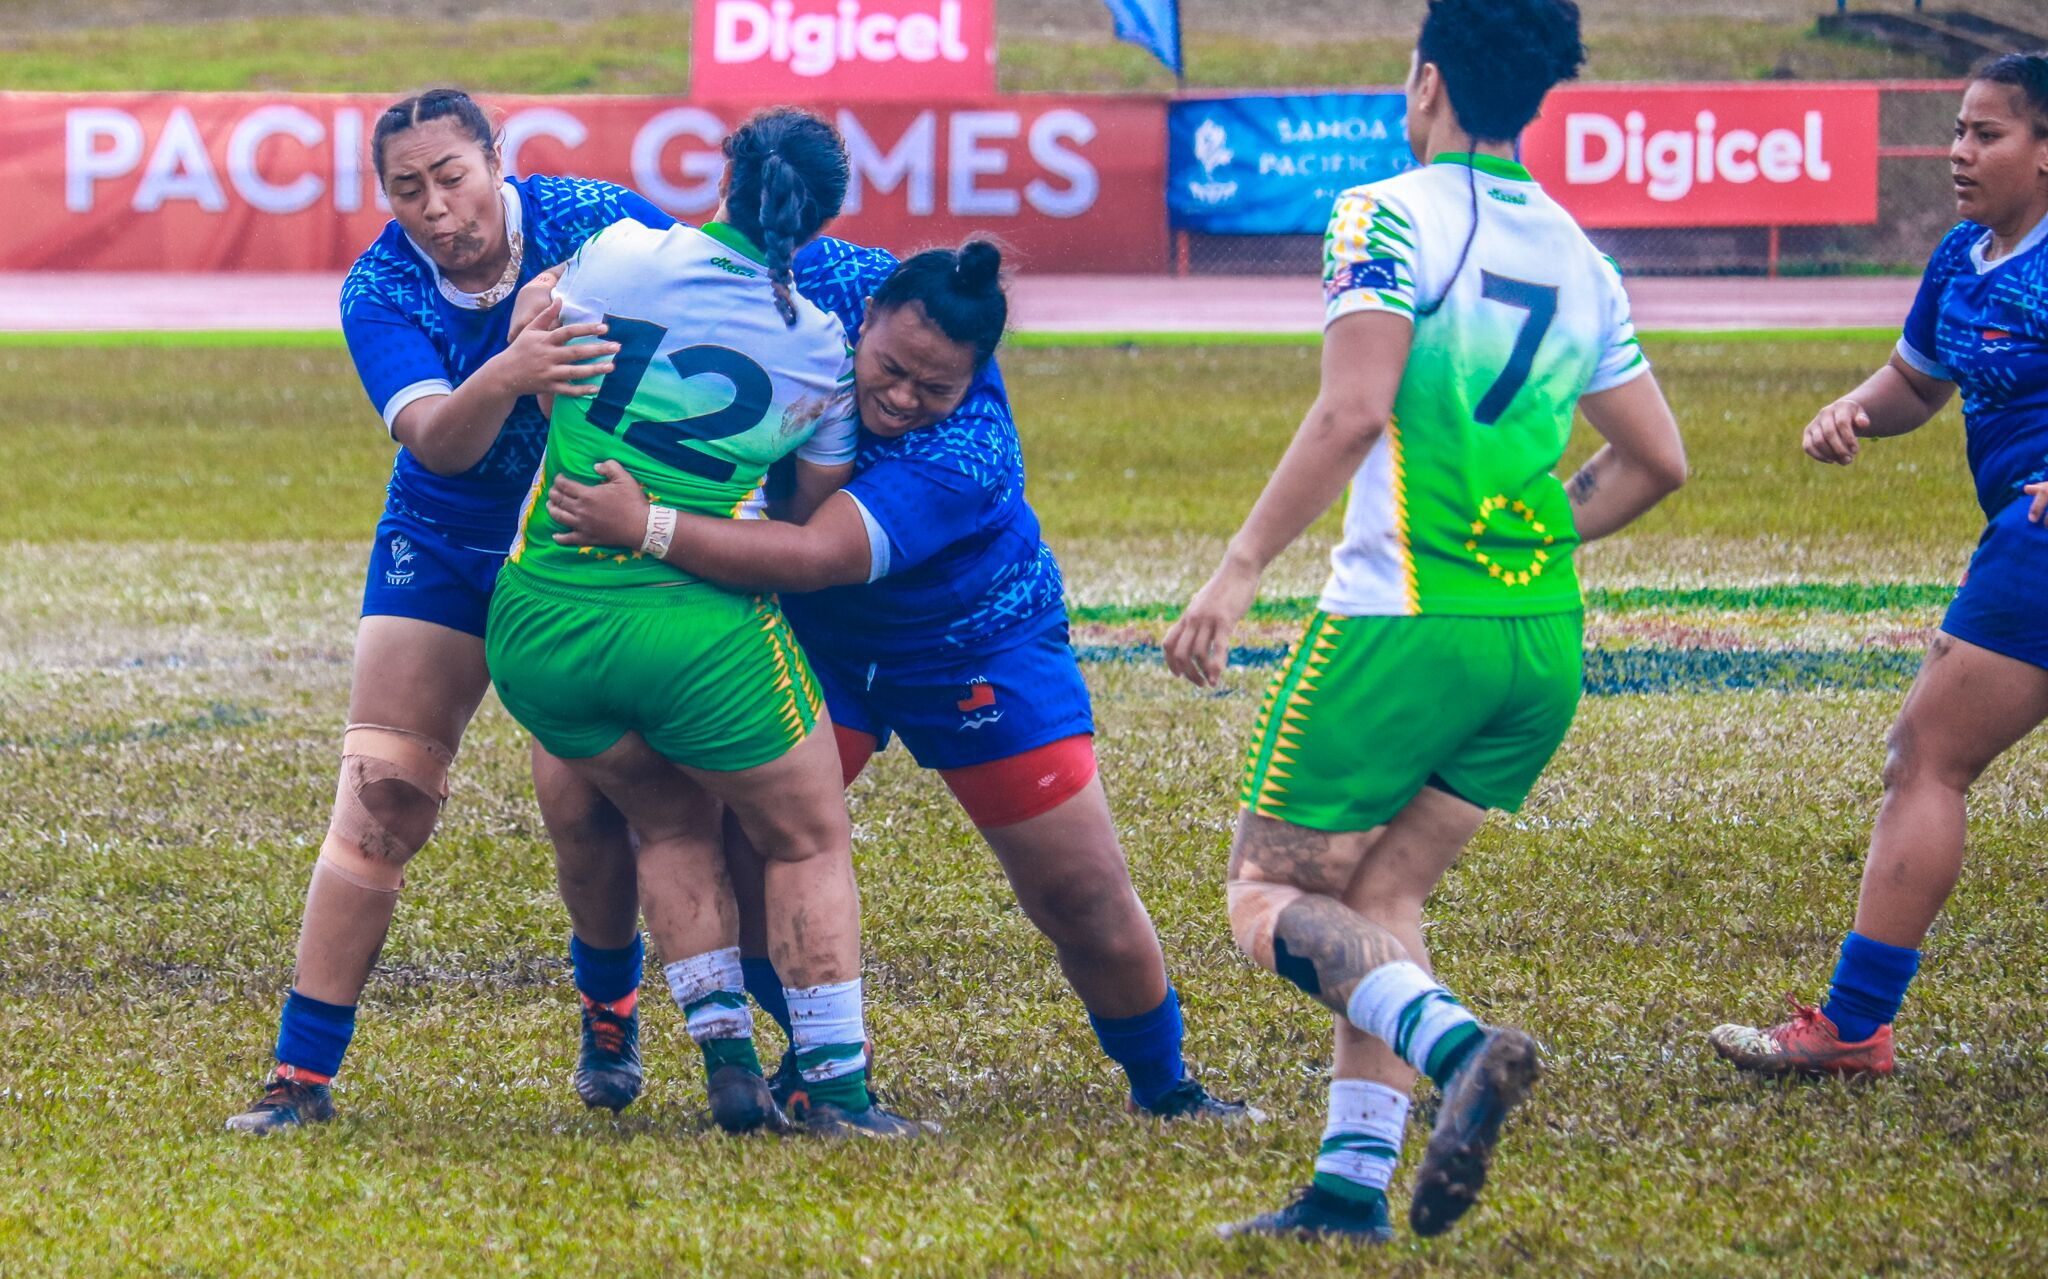 The women's rugby league nines event made its Pacific Games debut ©Samoa 2019